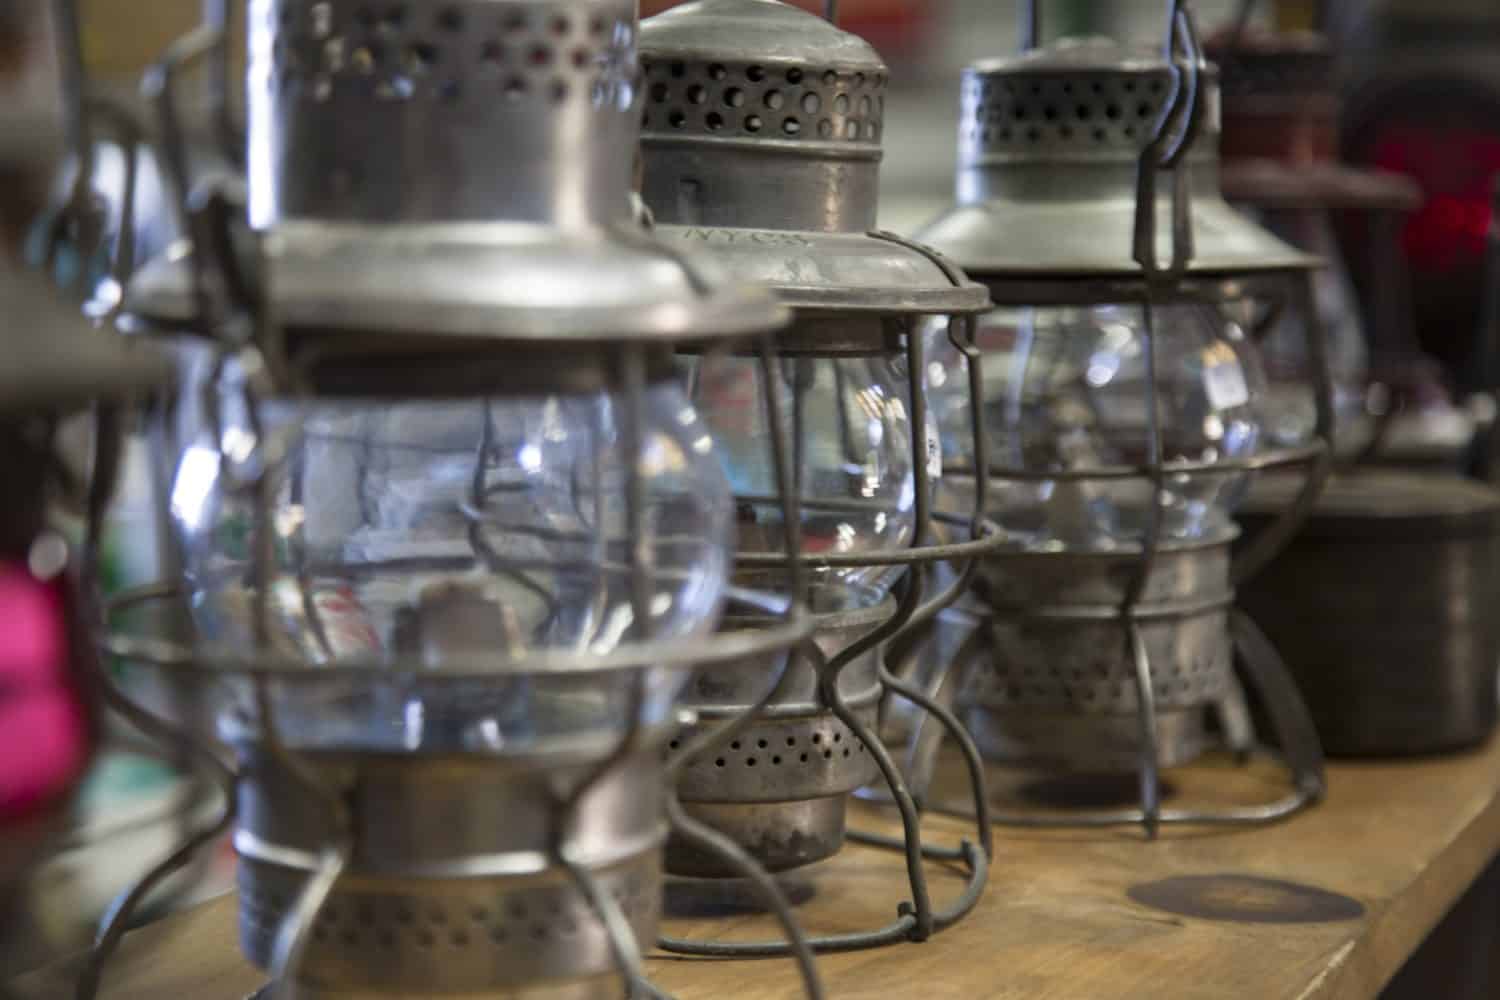 Isolated View of Antique Kerosene Camping Lanterns on Tabletop